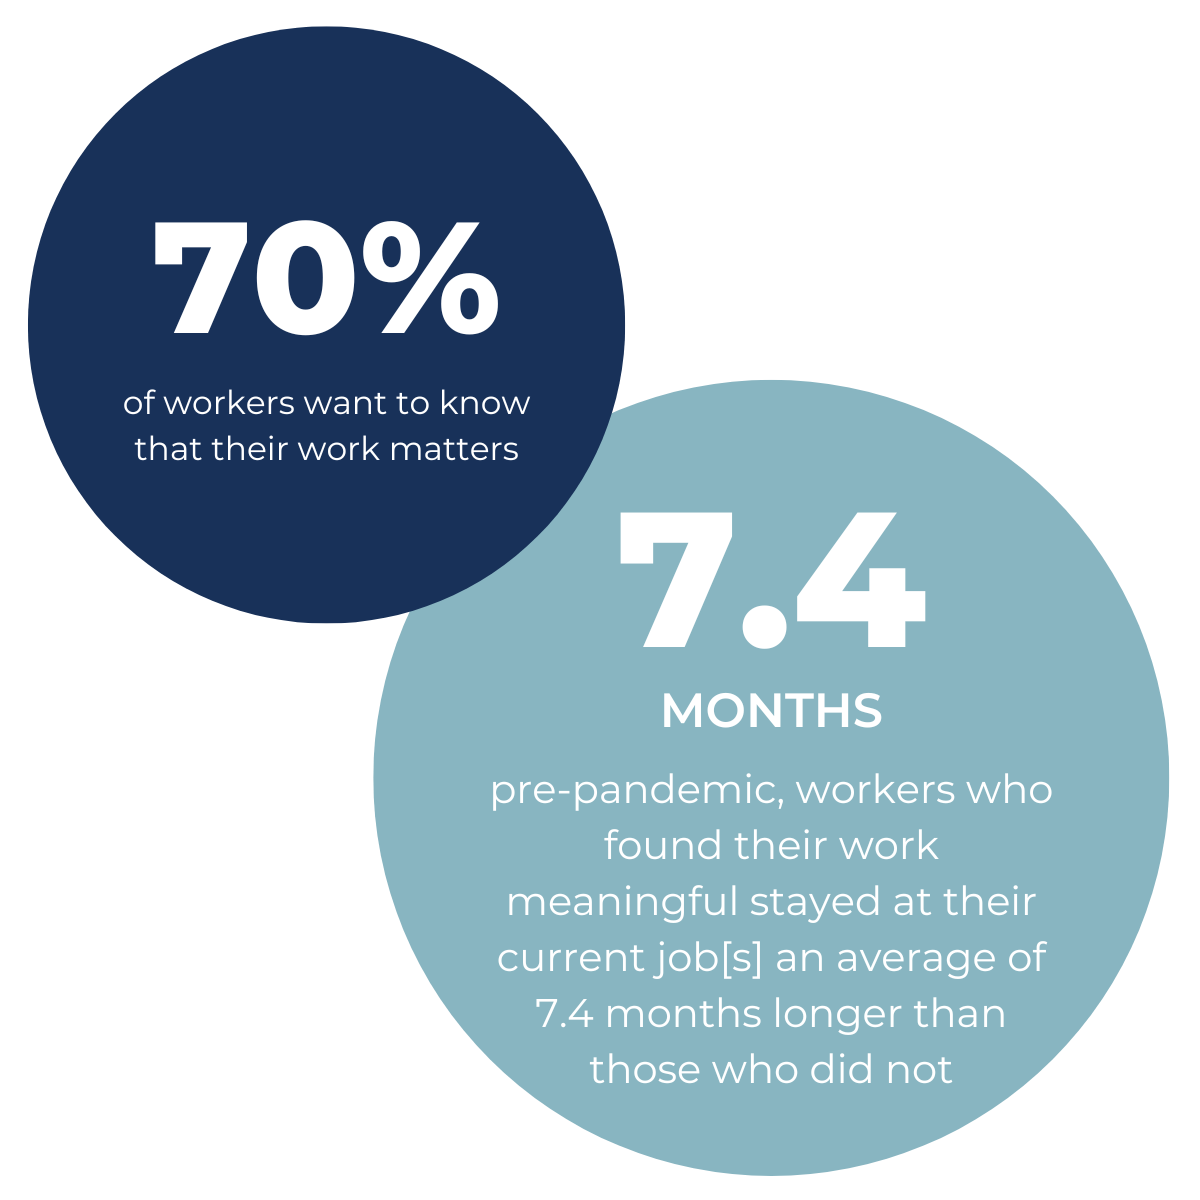 70% of workers want to know that their work matters